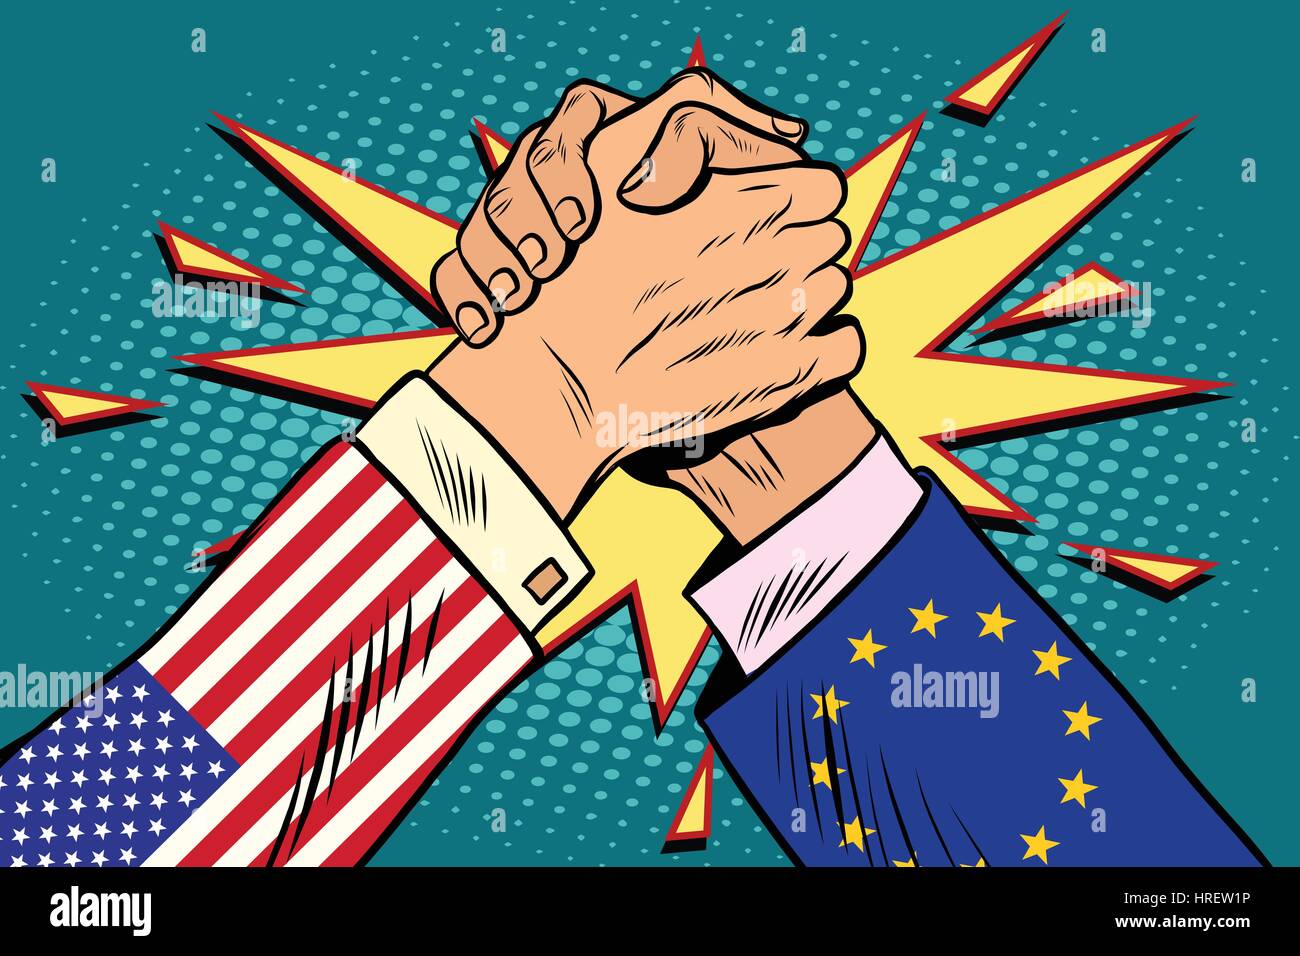 USA vs EU policy and competition, Arm wrestling fight confrontation, pop art retro vector illustration Stock Vector